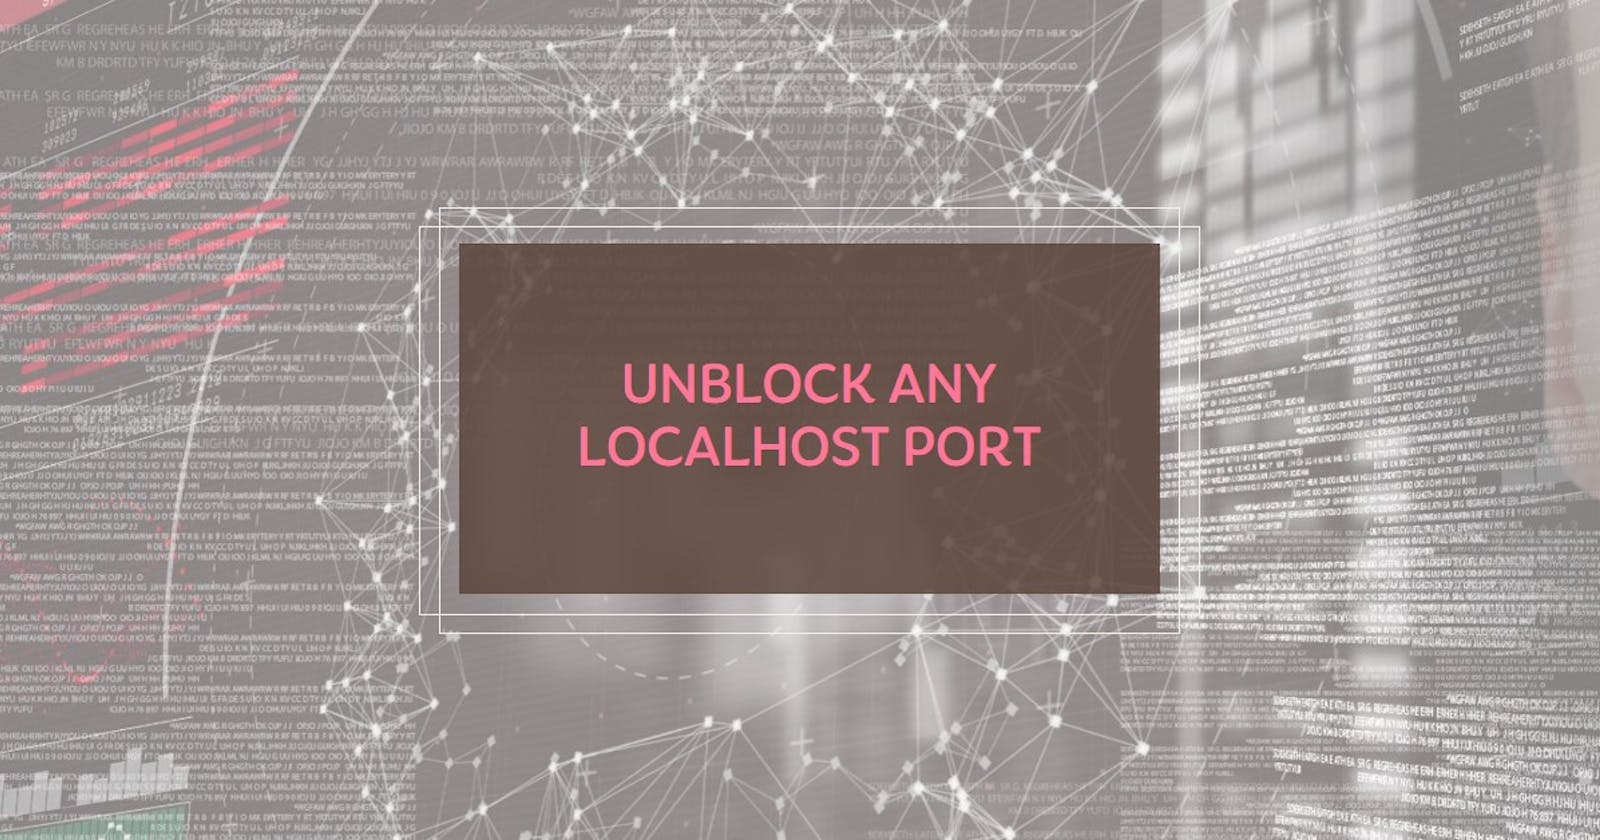 Trying to run your app on localhost:3000 but for some reason, the port is blocked?